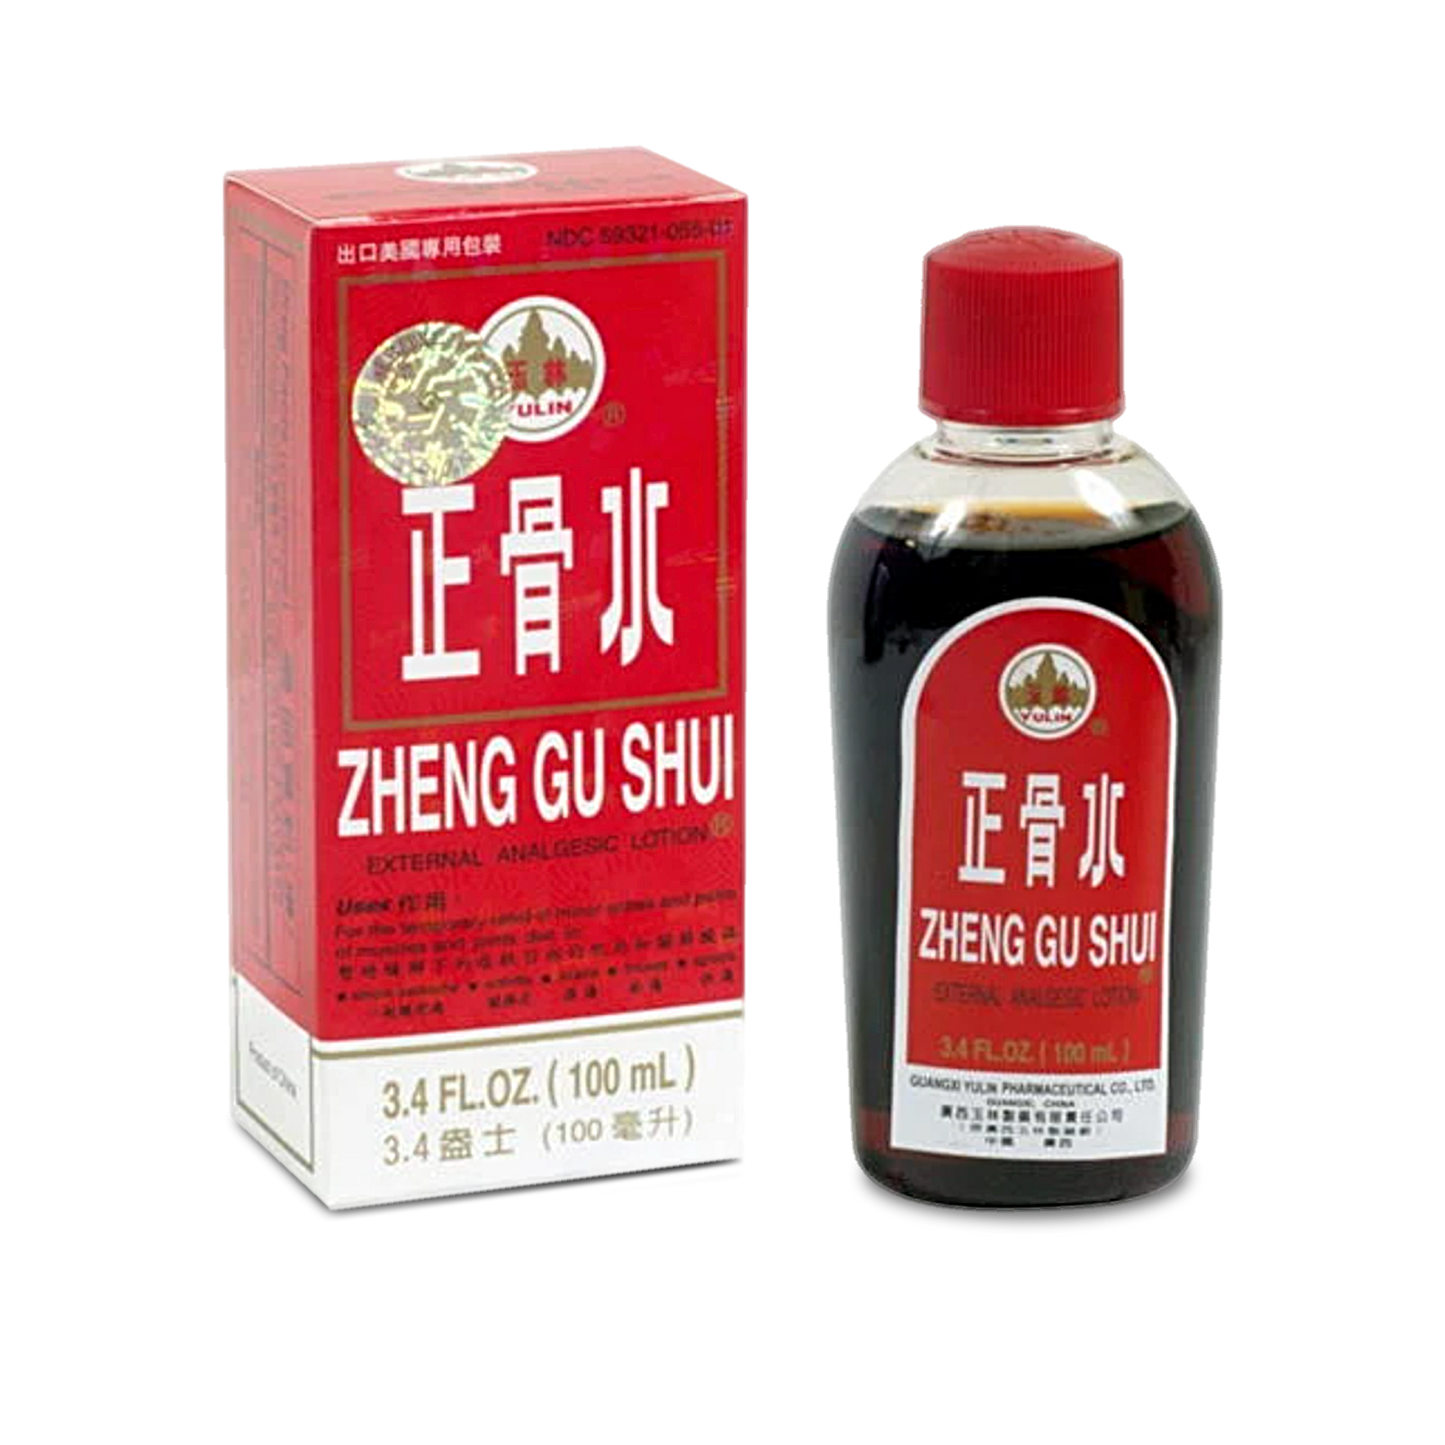 Zheng Gu Shui is a topical that may aid in increasing circulation topically, to the injured areas and help heal and reduce pain.